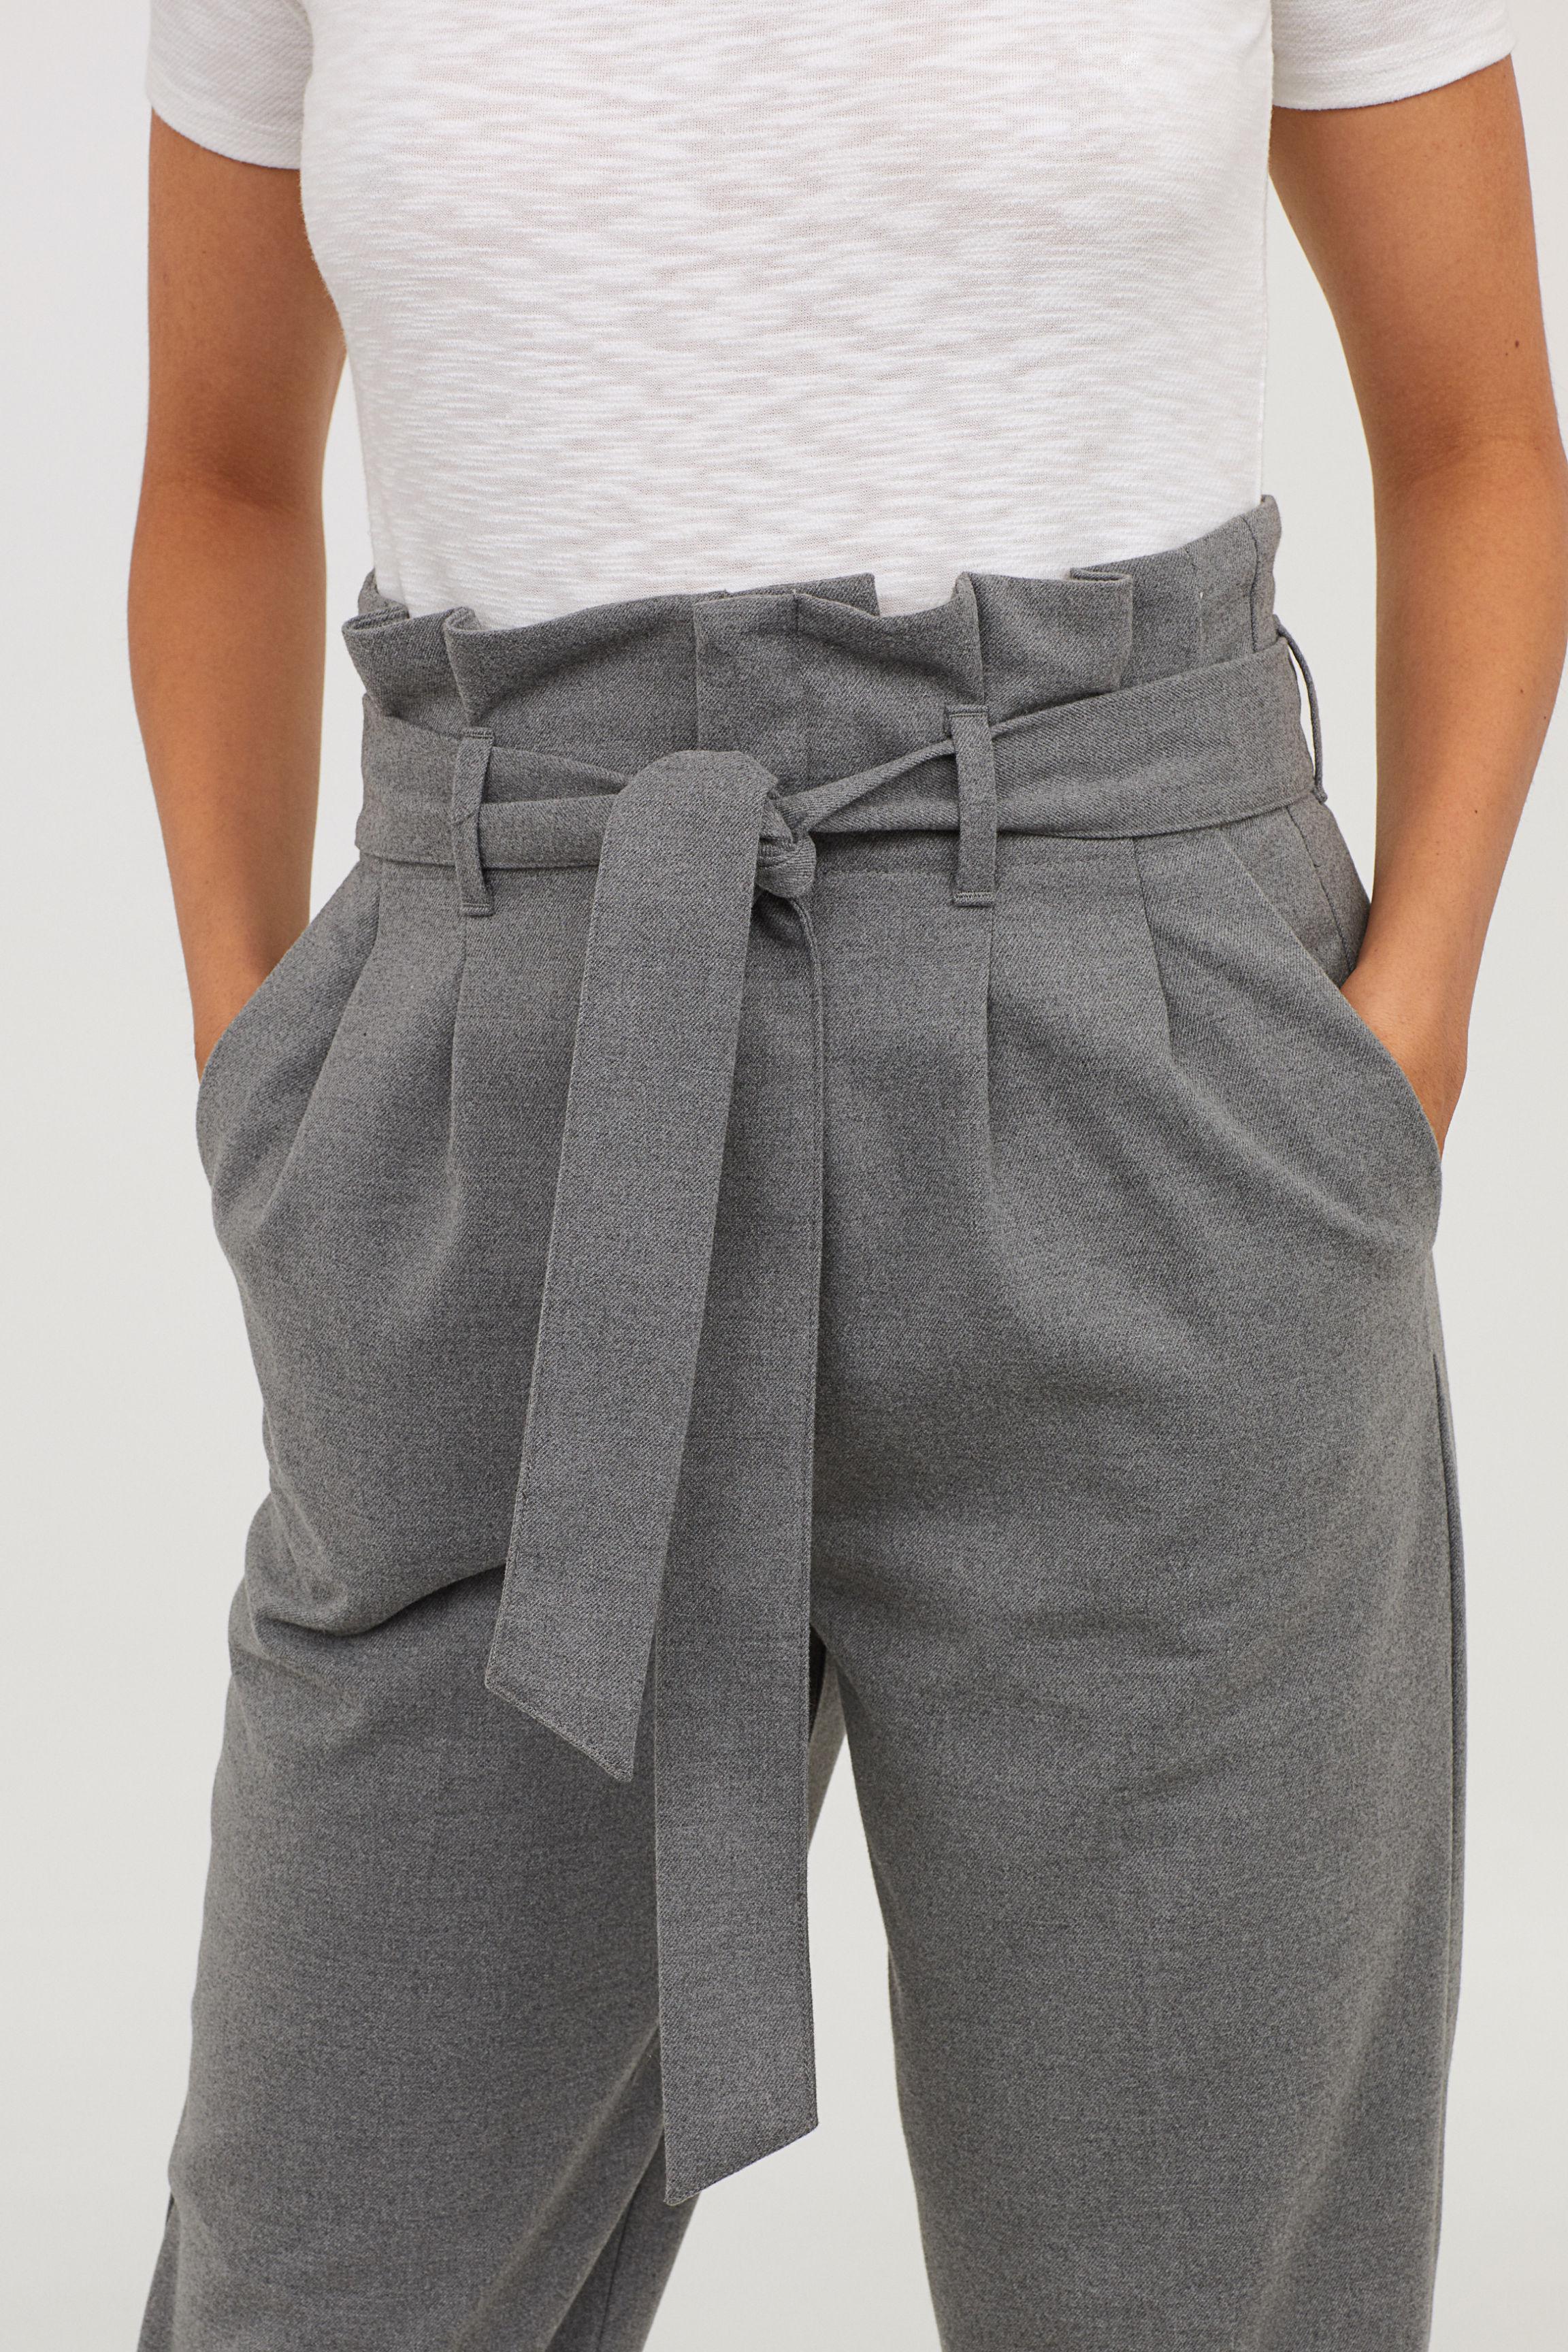 H&M Paper Bag Trousers in Gray | Lyst